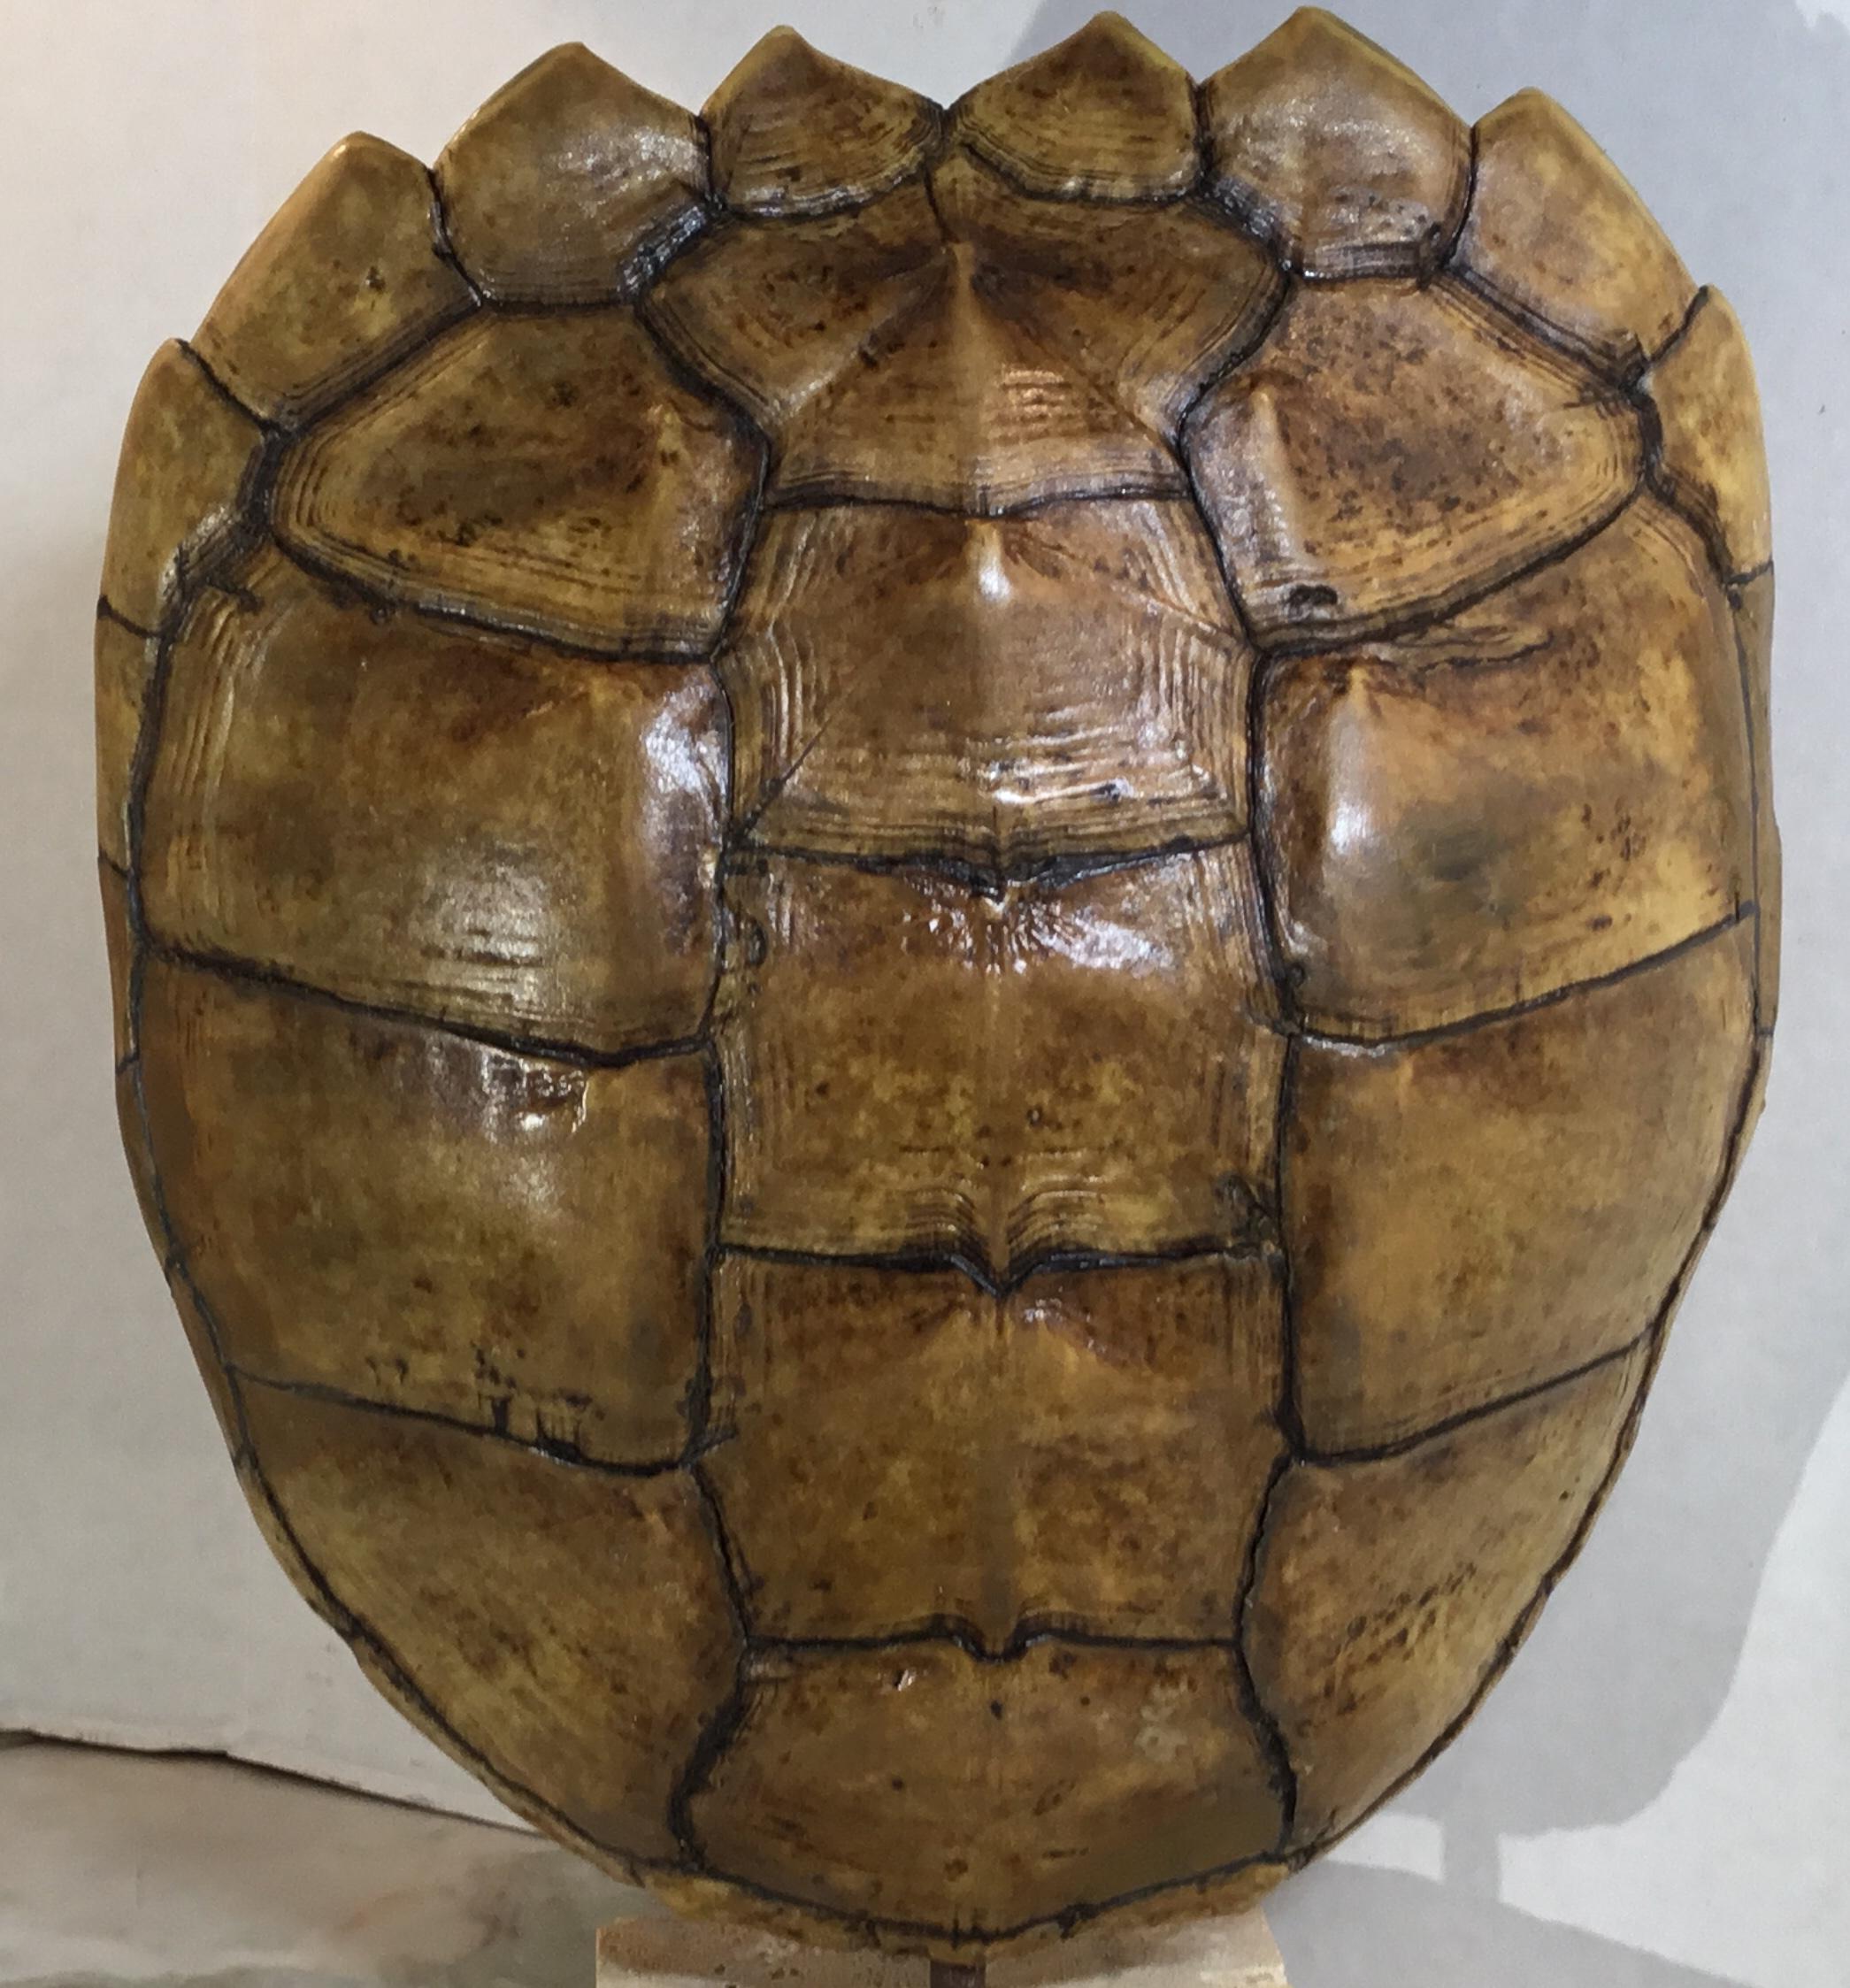 Genuine American Frash Water Snapping Turtle Shell 2